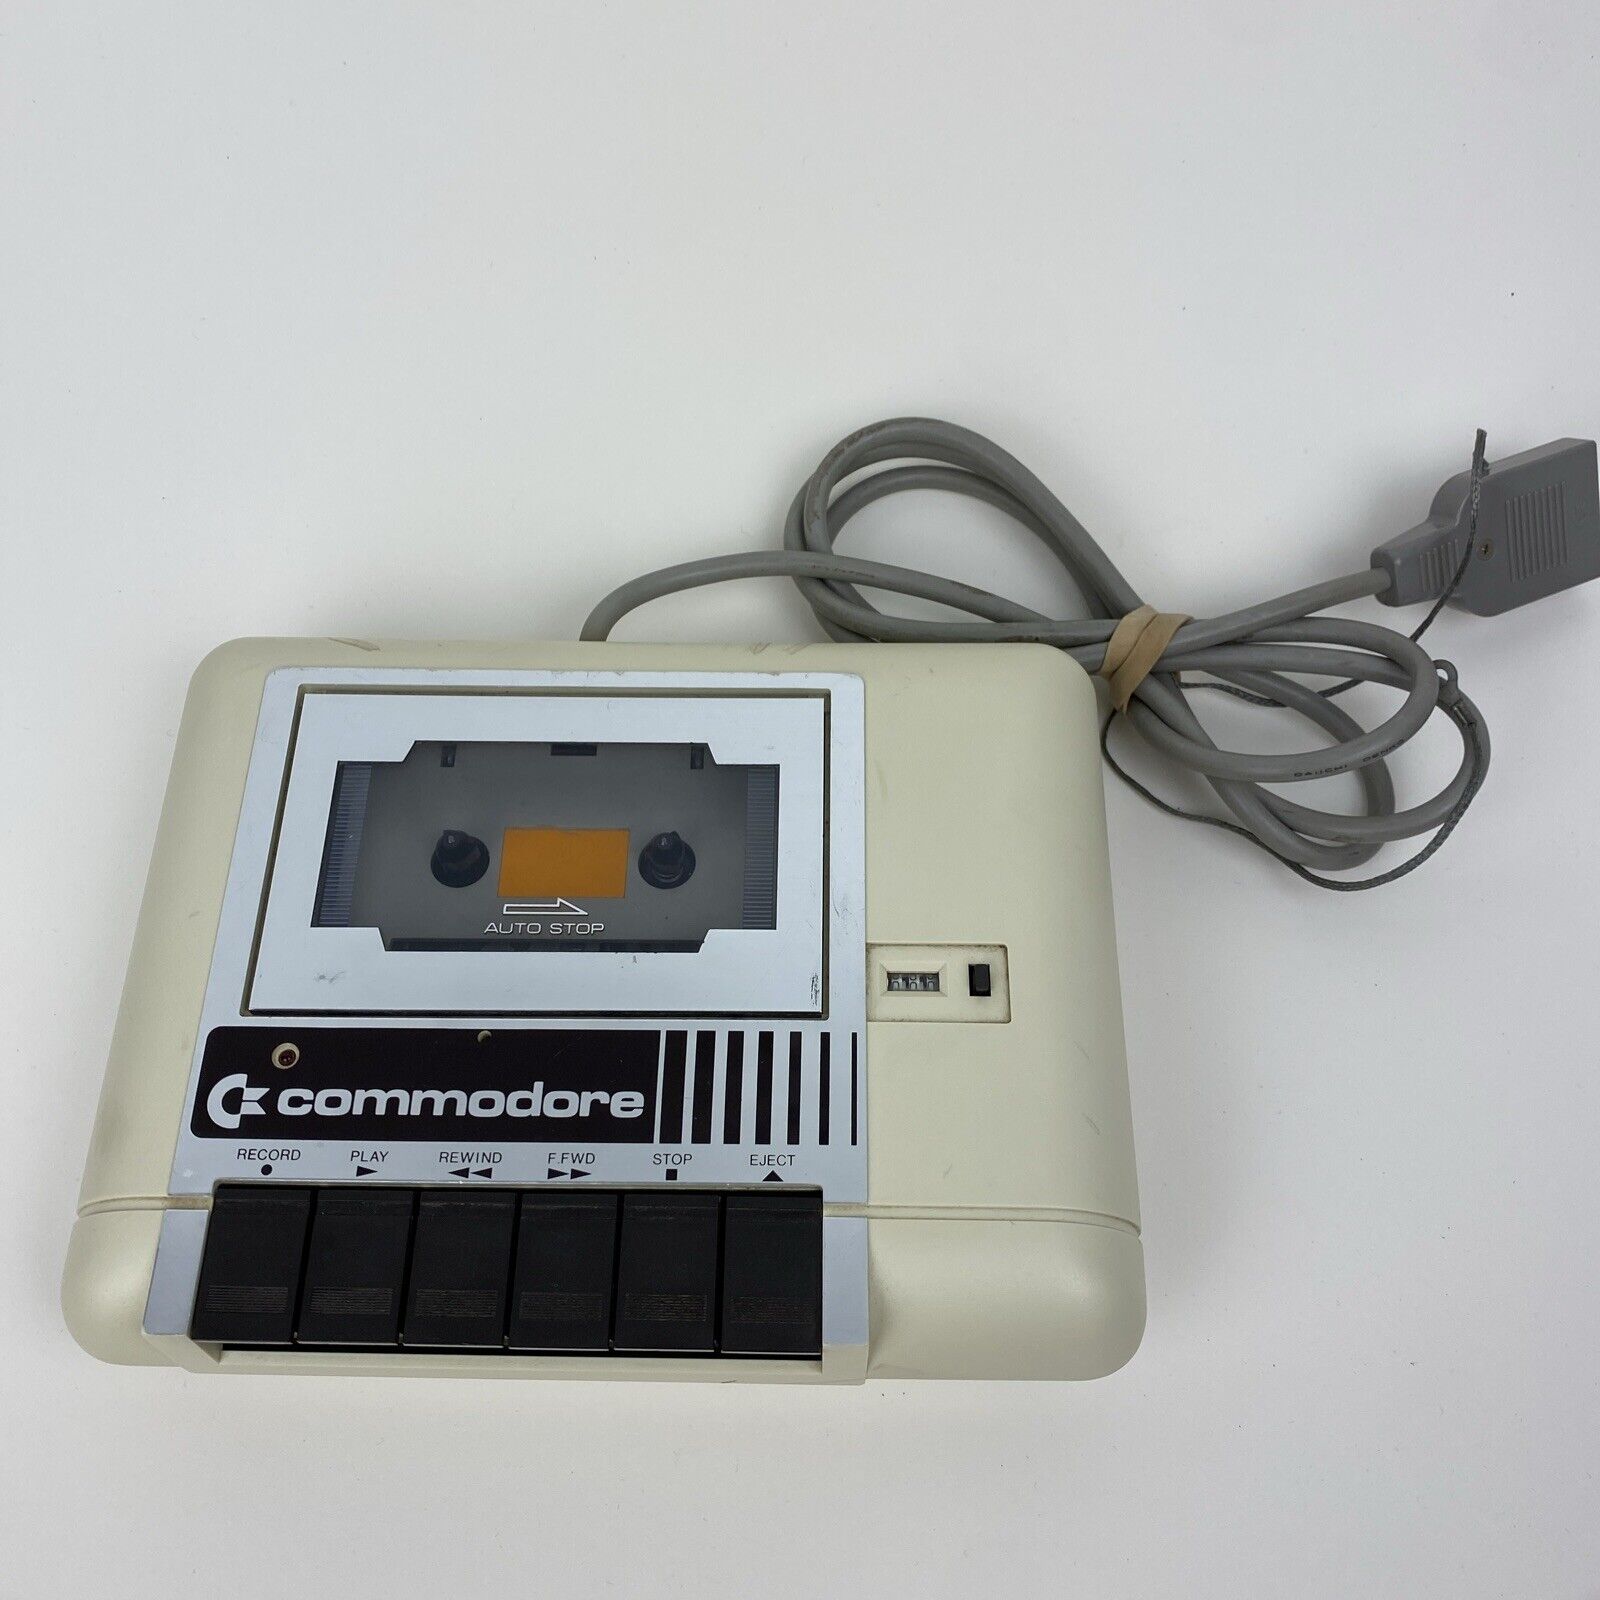 Vintage Commodore 1830188 Datasette Unit Cassette Tape Computer Player Untested